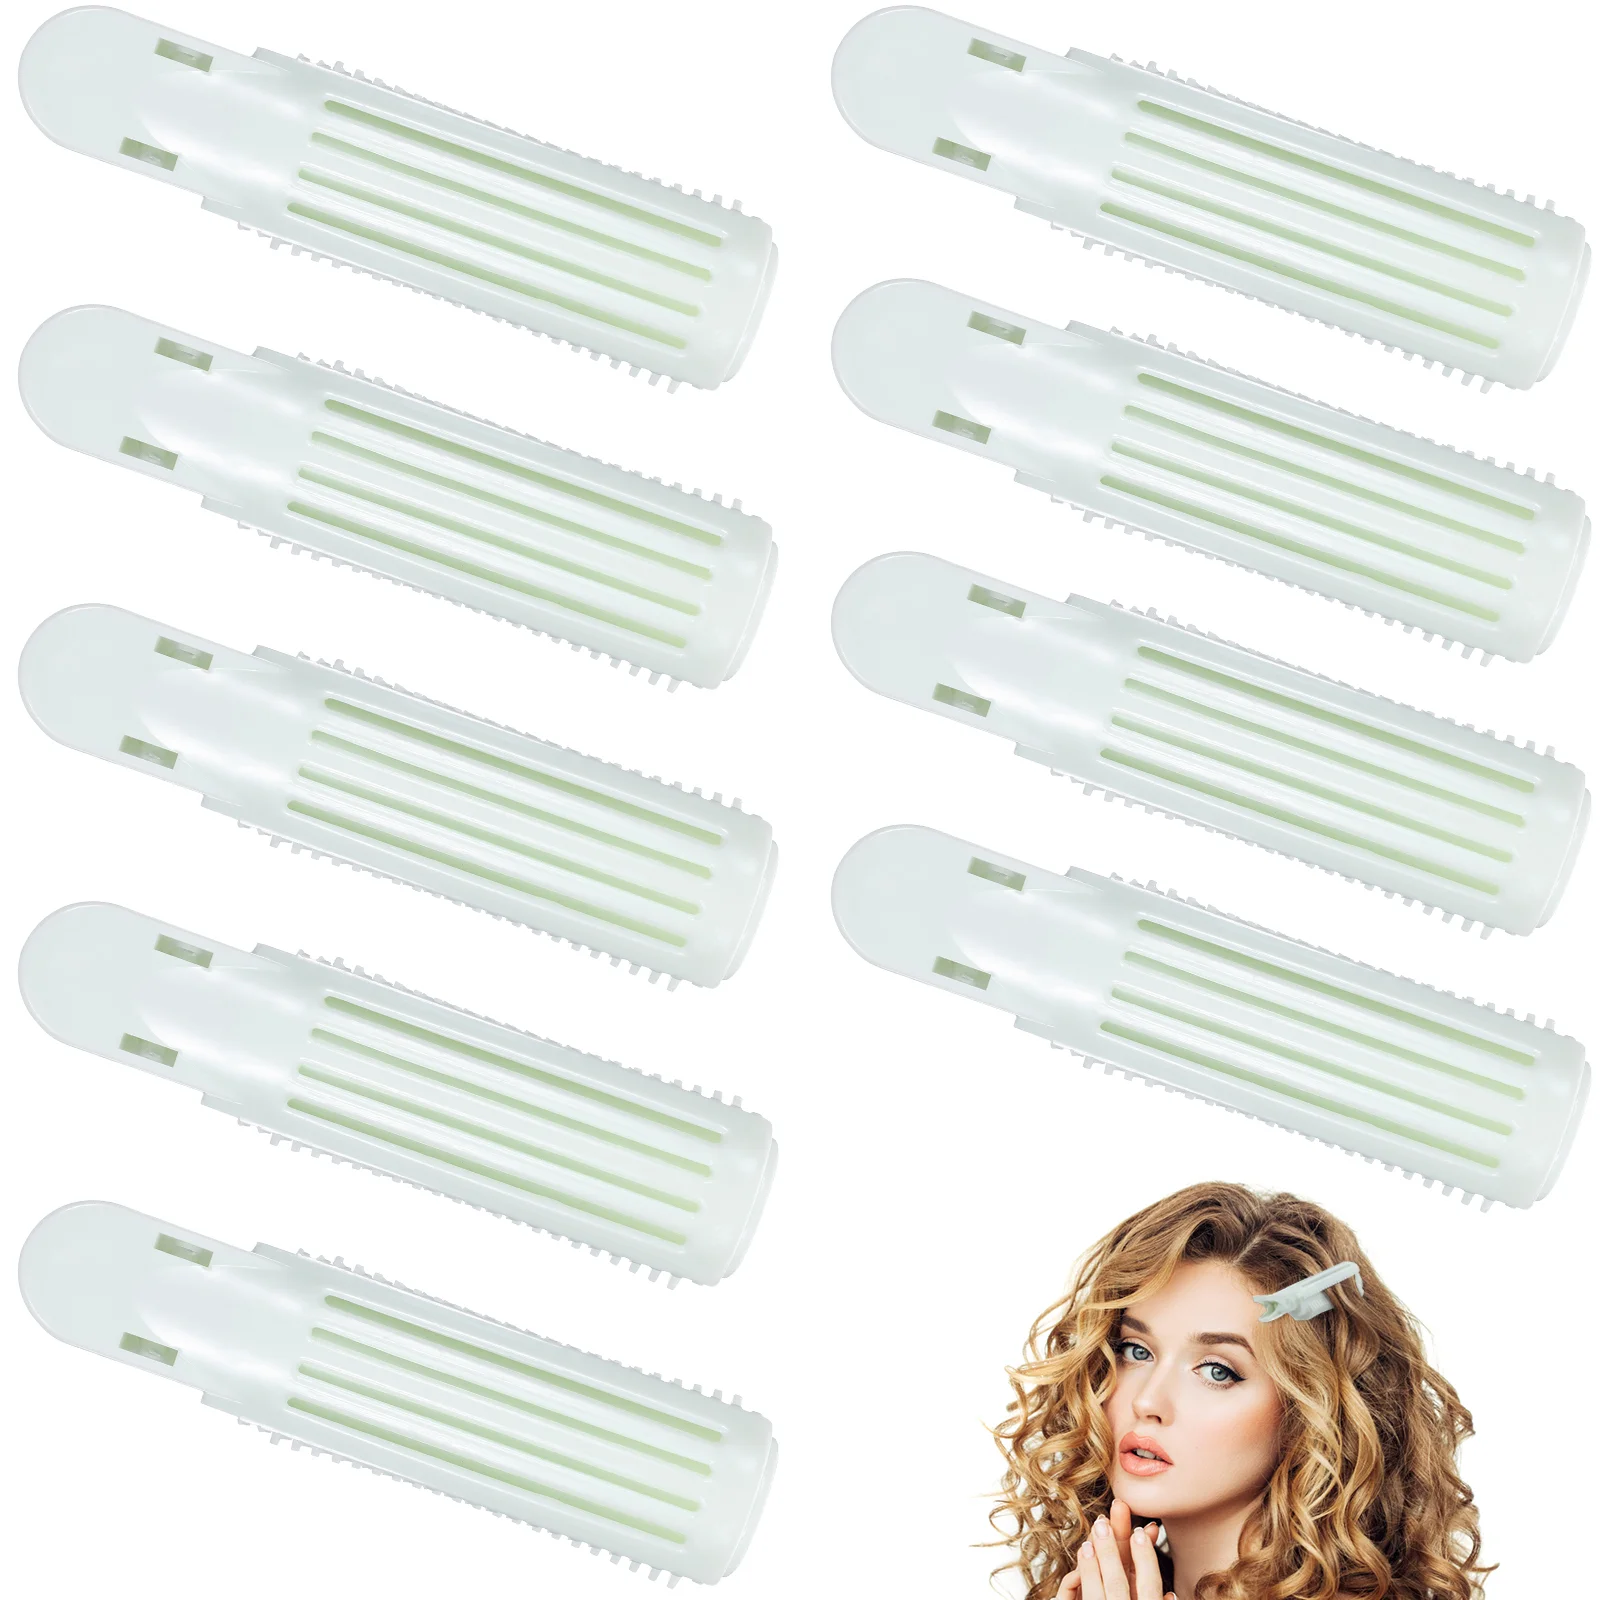 10 Pcs Curlers Bangs Clips Root for Curly Hair Volume Rollers Barrettes Volumizing Adjustable g type adjustable volume earpiece pu wire 2pin ptt headphone for kenwood baofeng uv 5r for quansheng uv k5 retevis rt5r radios